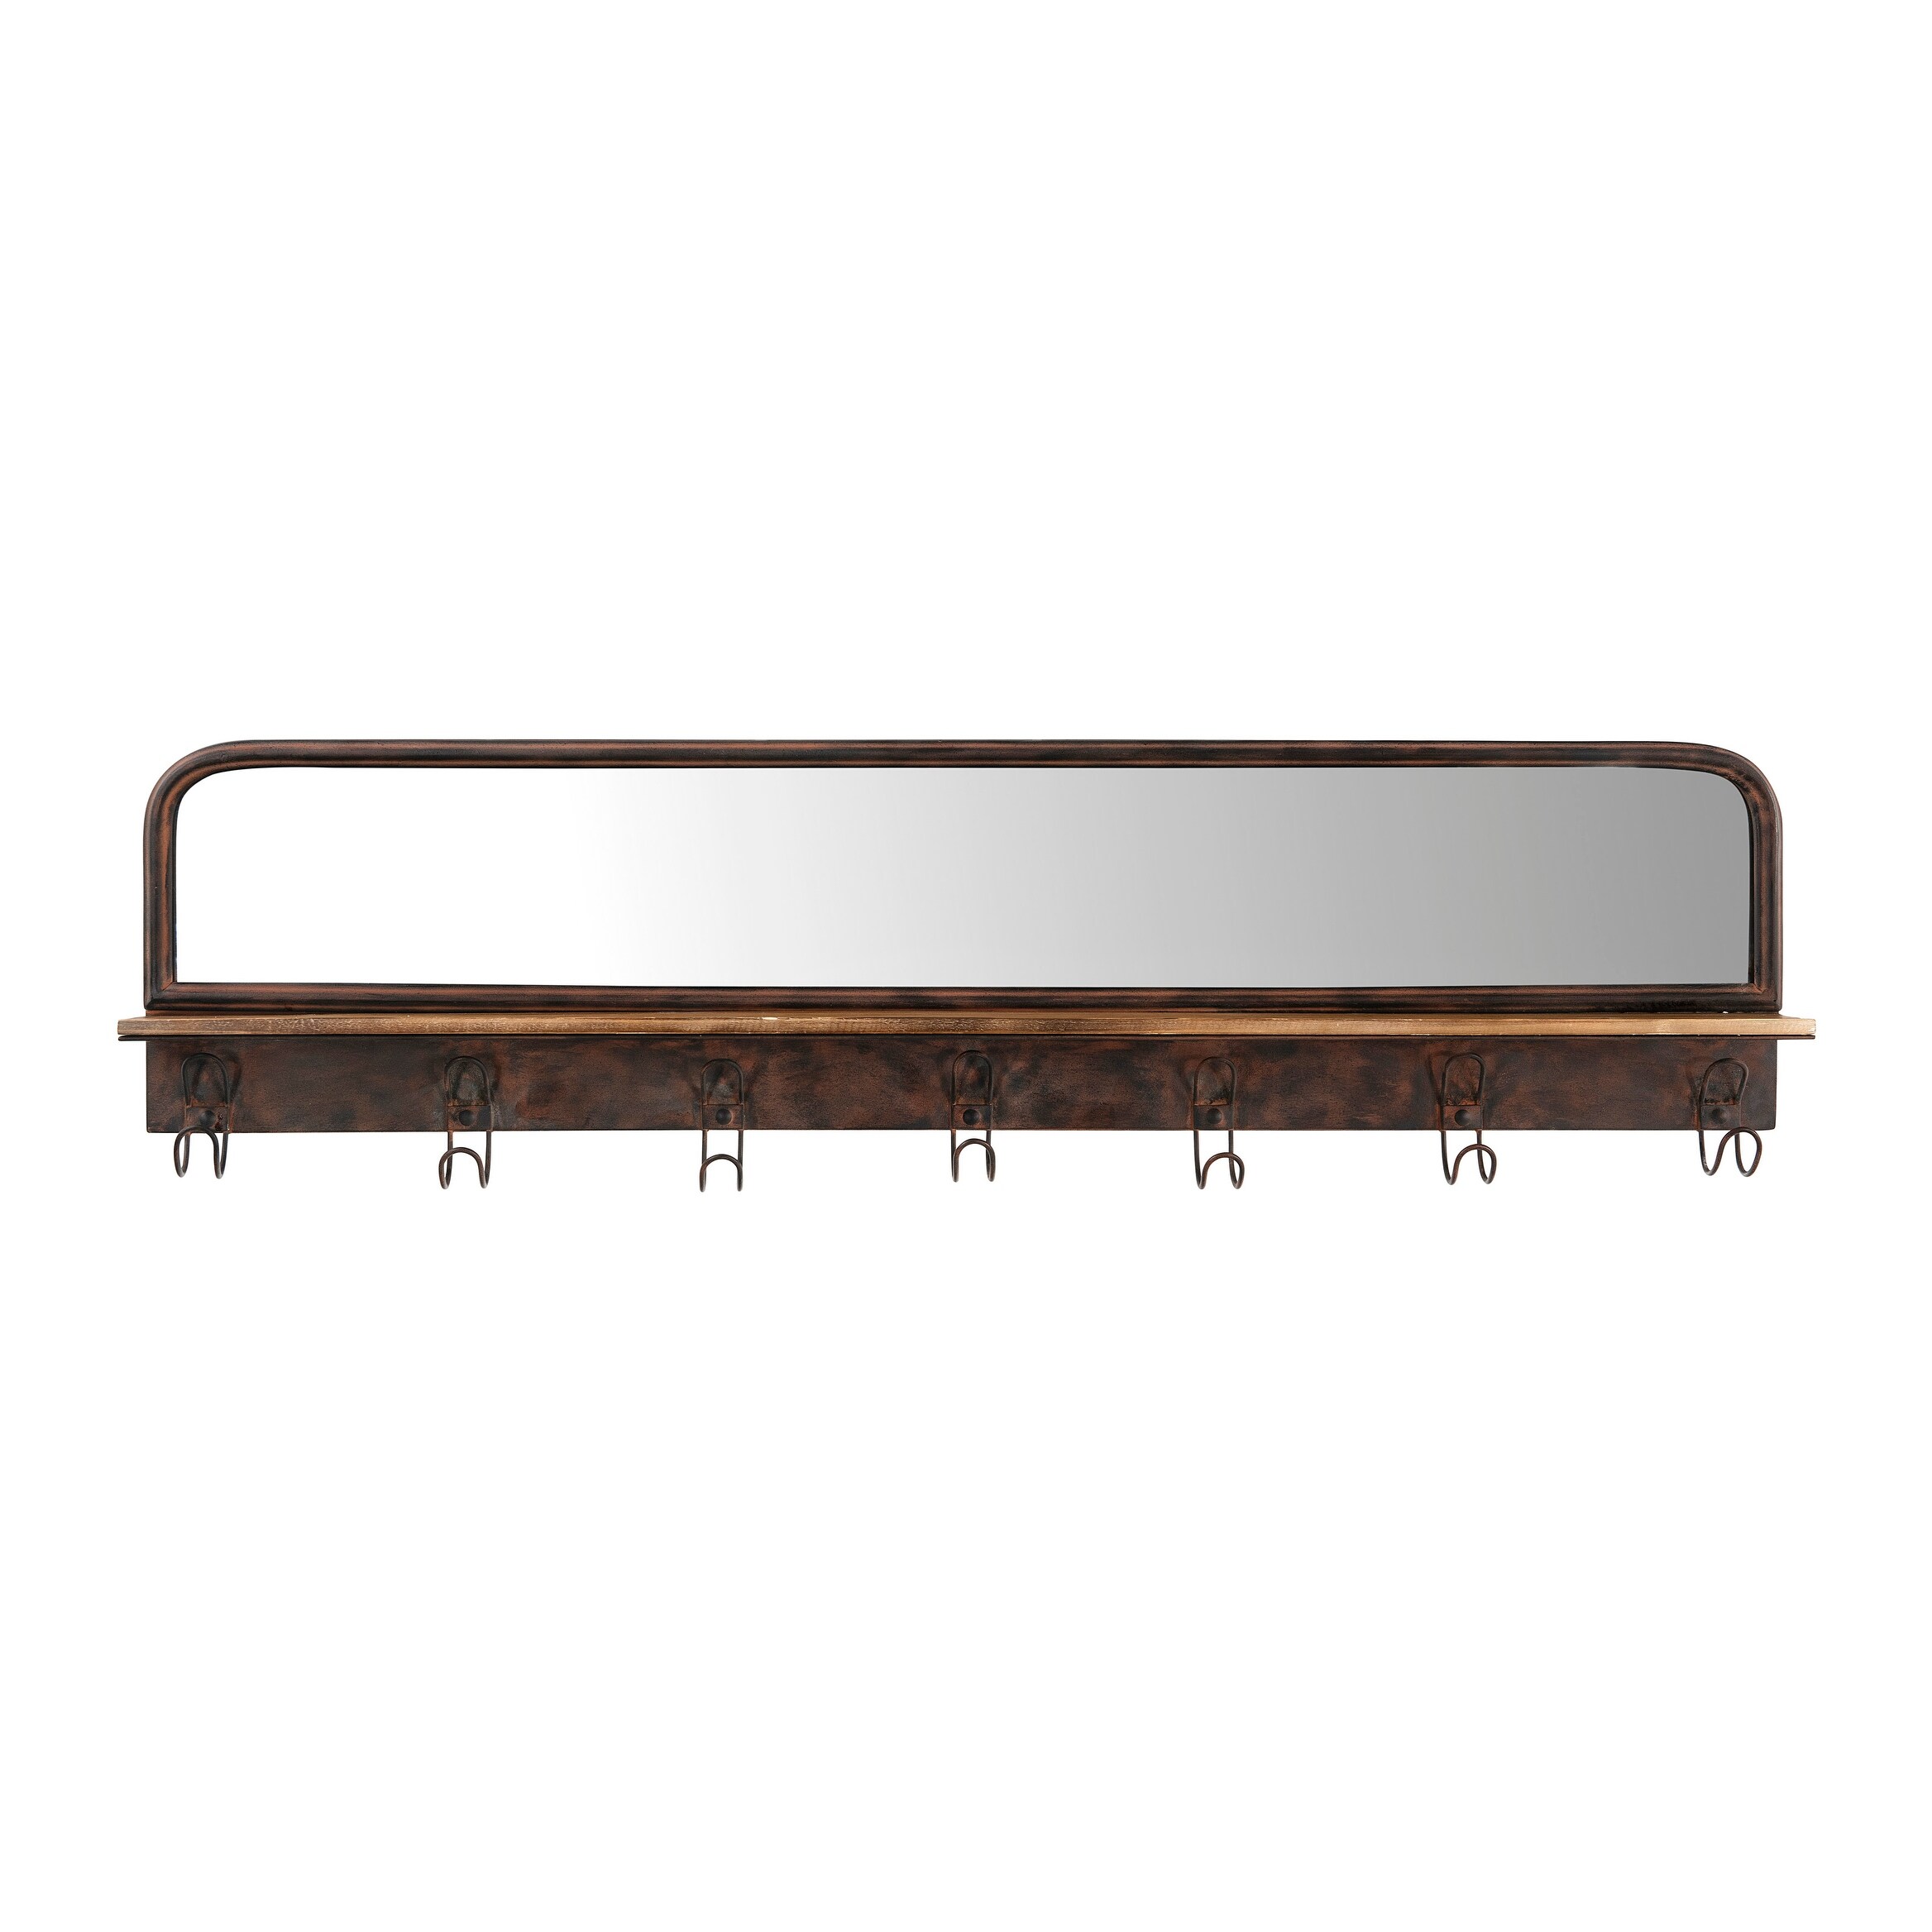 https://ak1.ostkcdn.com/images/products/is/images/direct/c913c11d3f3dd4aa90aaf9d94eaa63dbe2dfac63/39.5%22-Metal-Wall-Mirror-with-Wood-Shelf-%26-7-Hooks.jpg